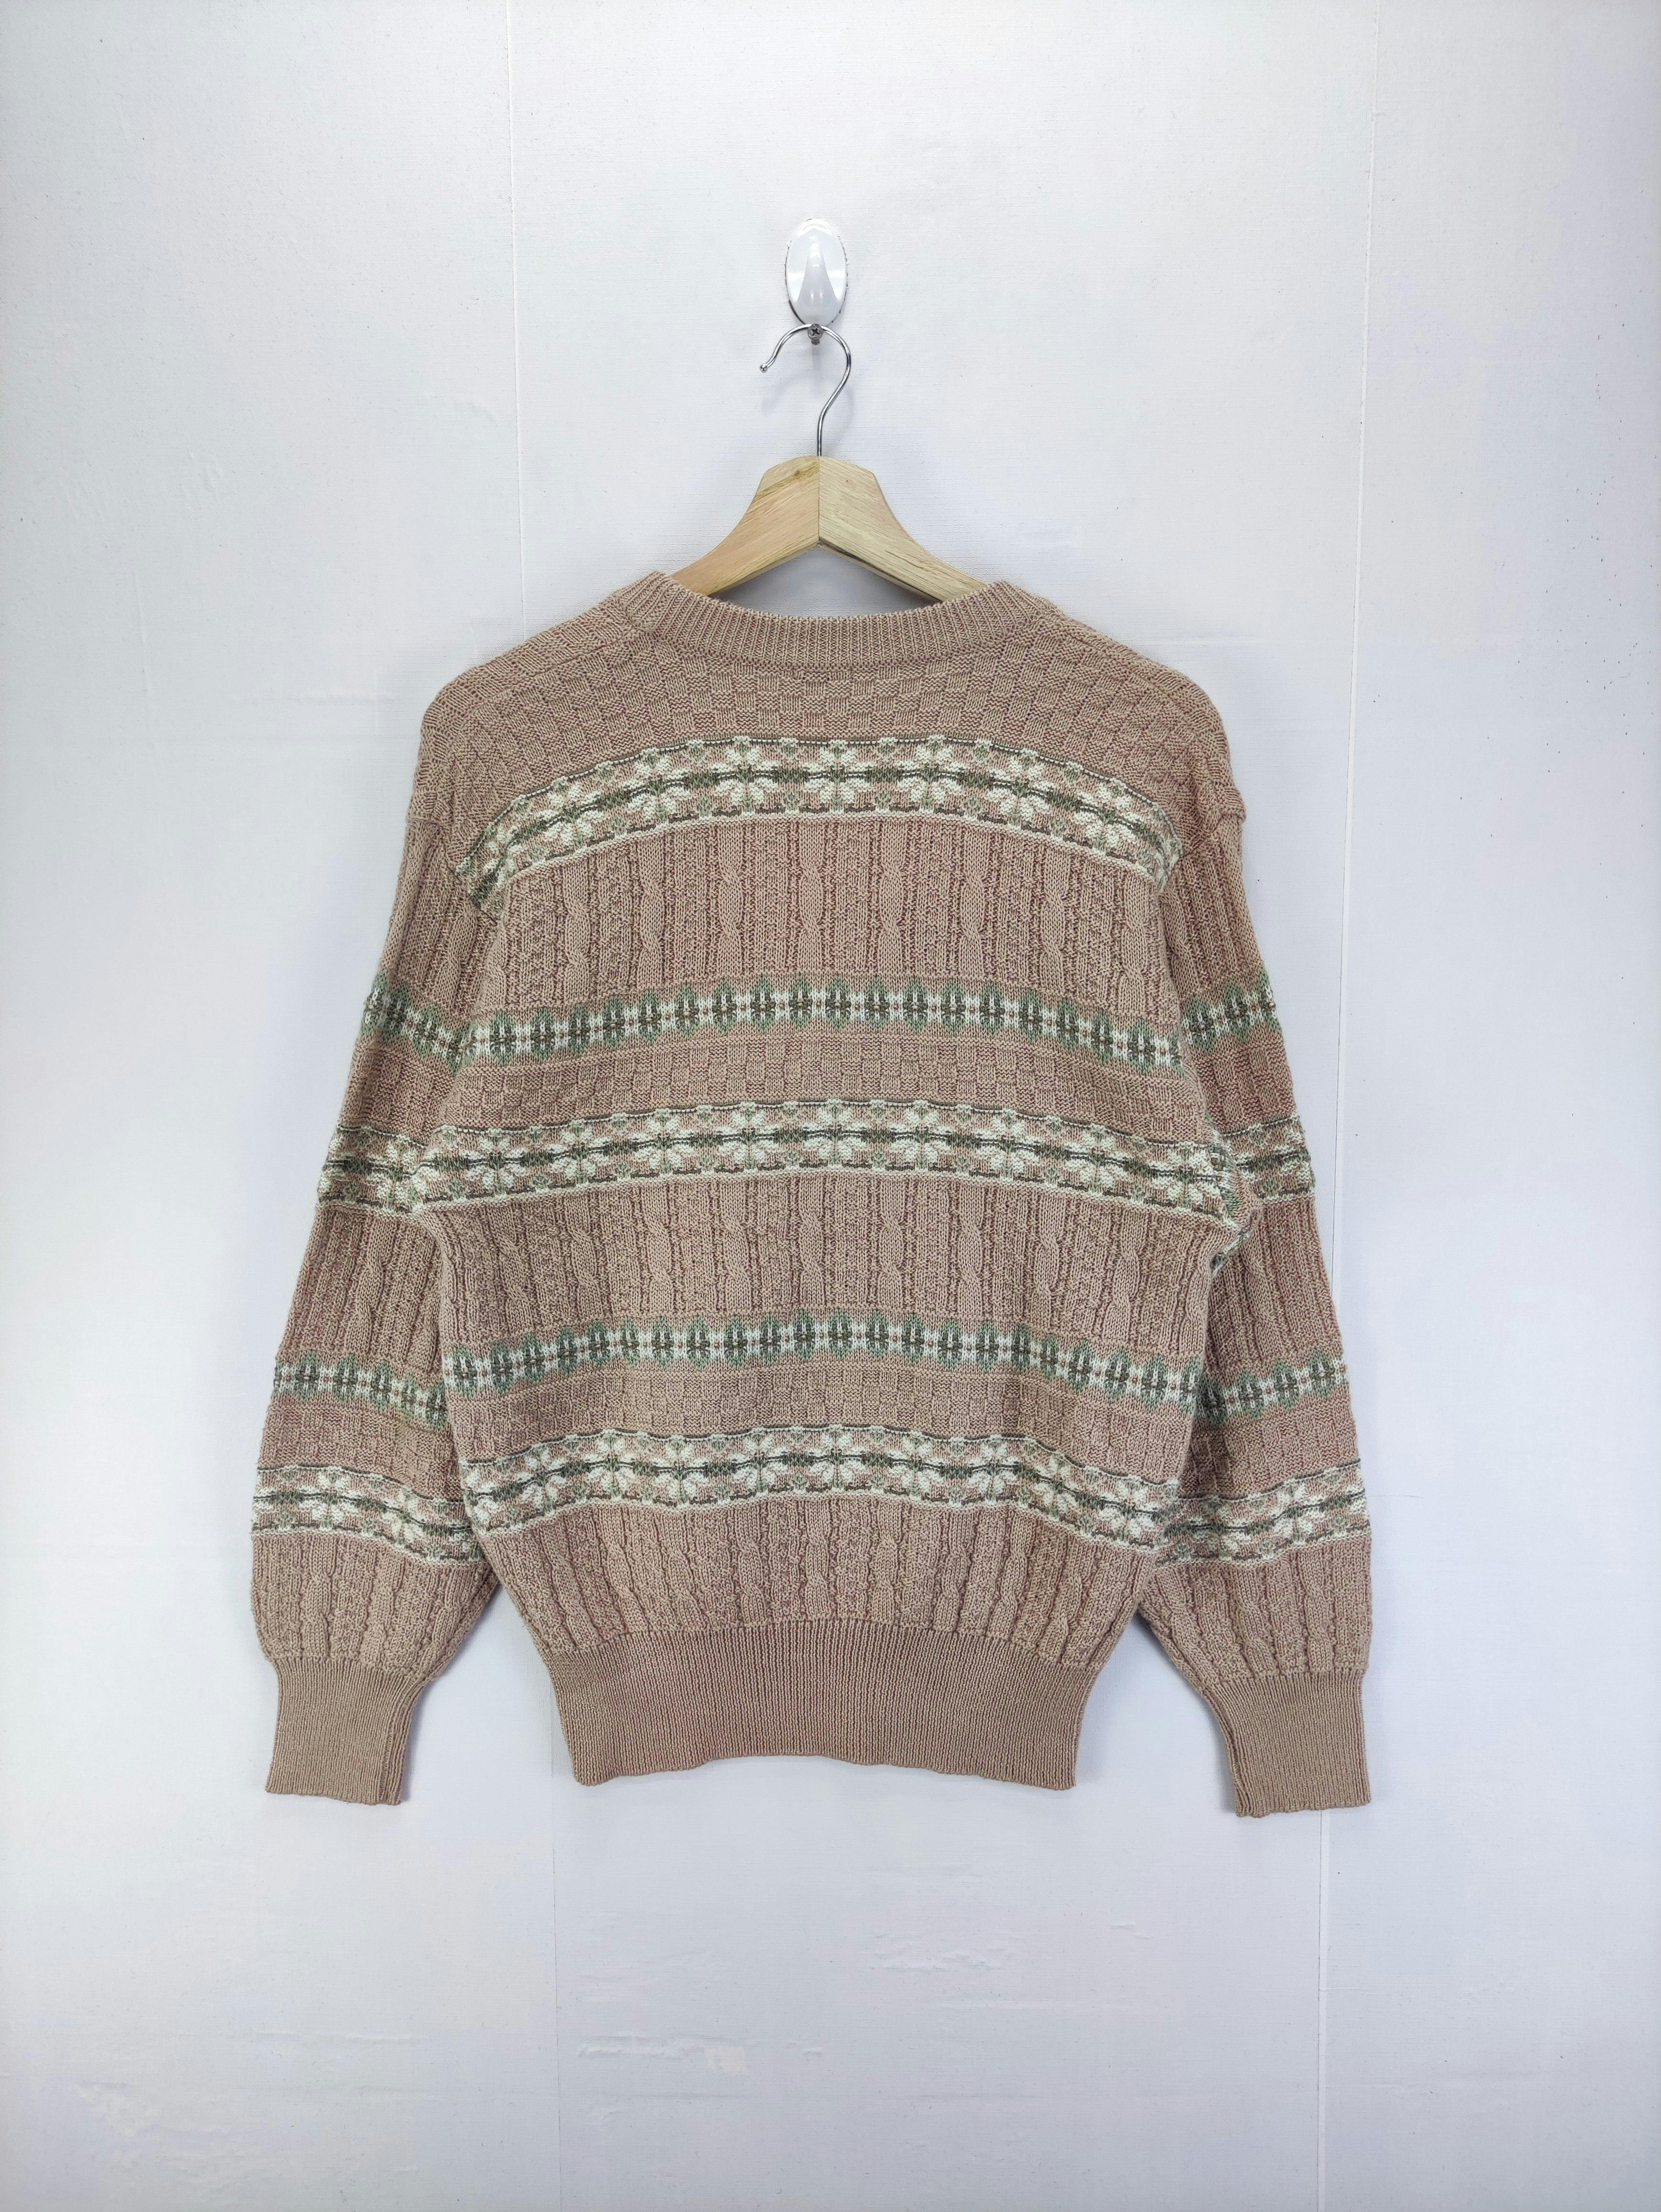 Japanese Brand - Vintage Cardigan knit Sweater By Oui - 5